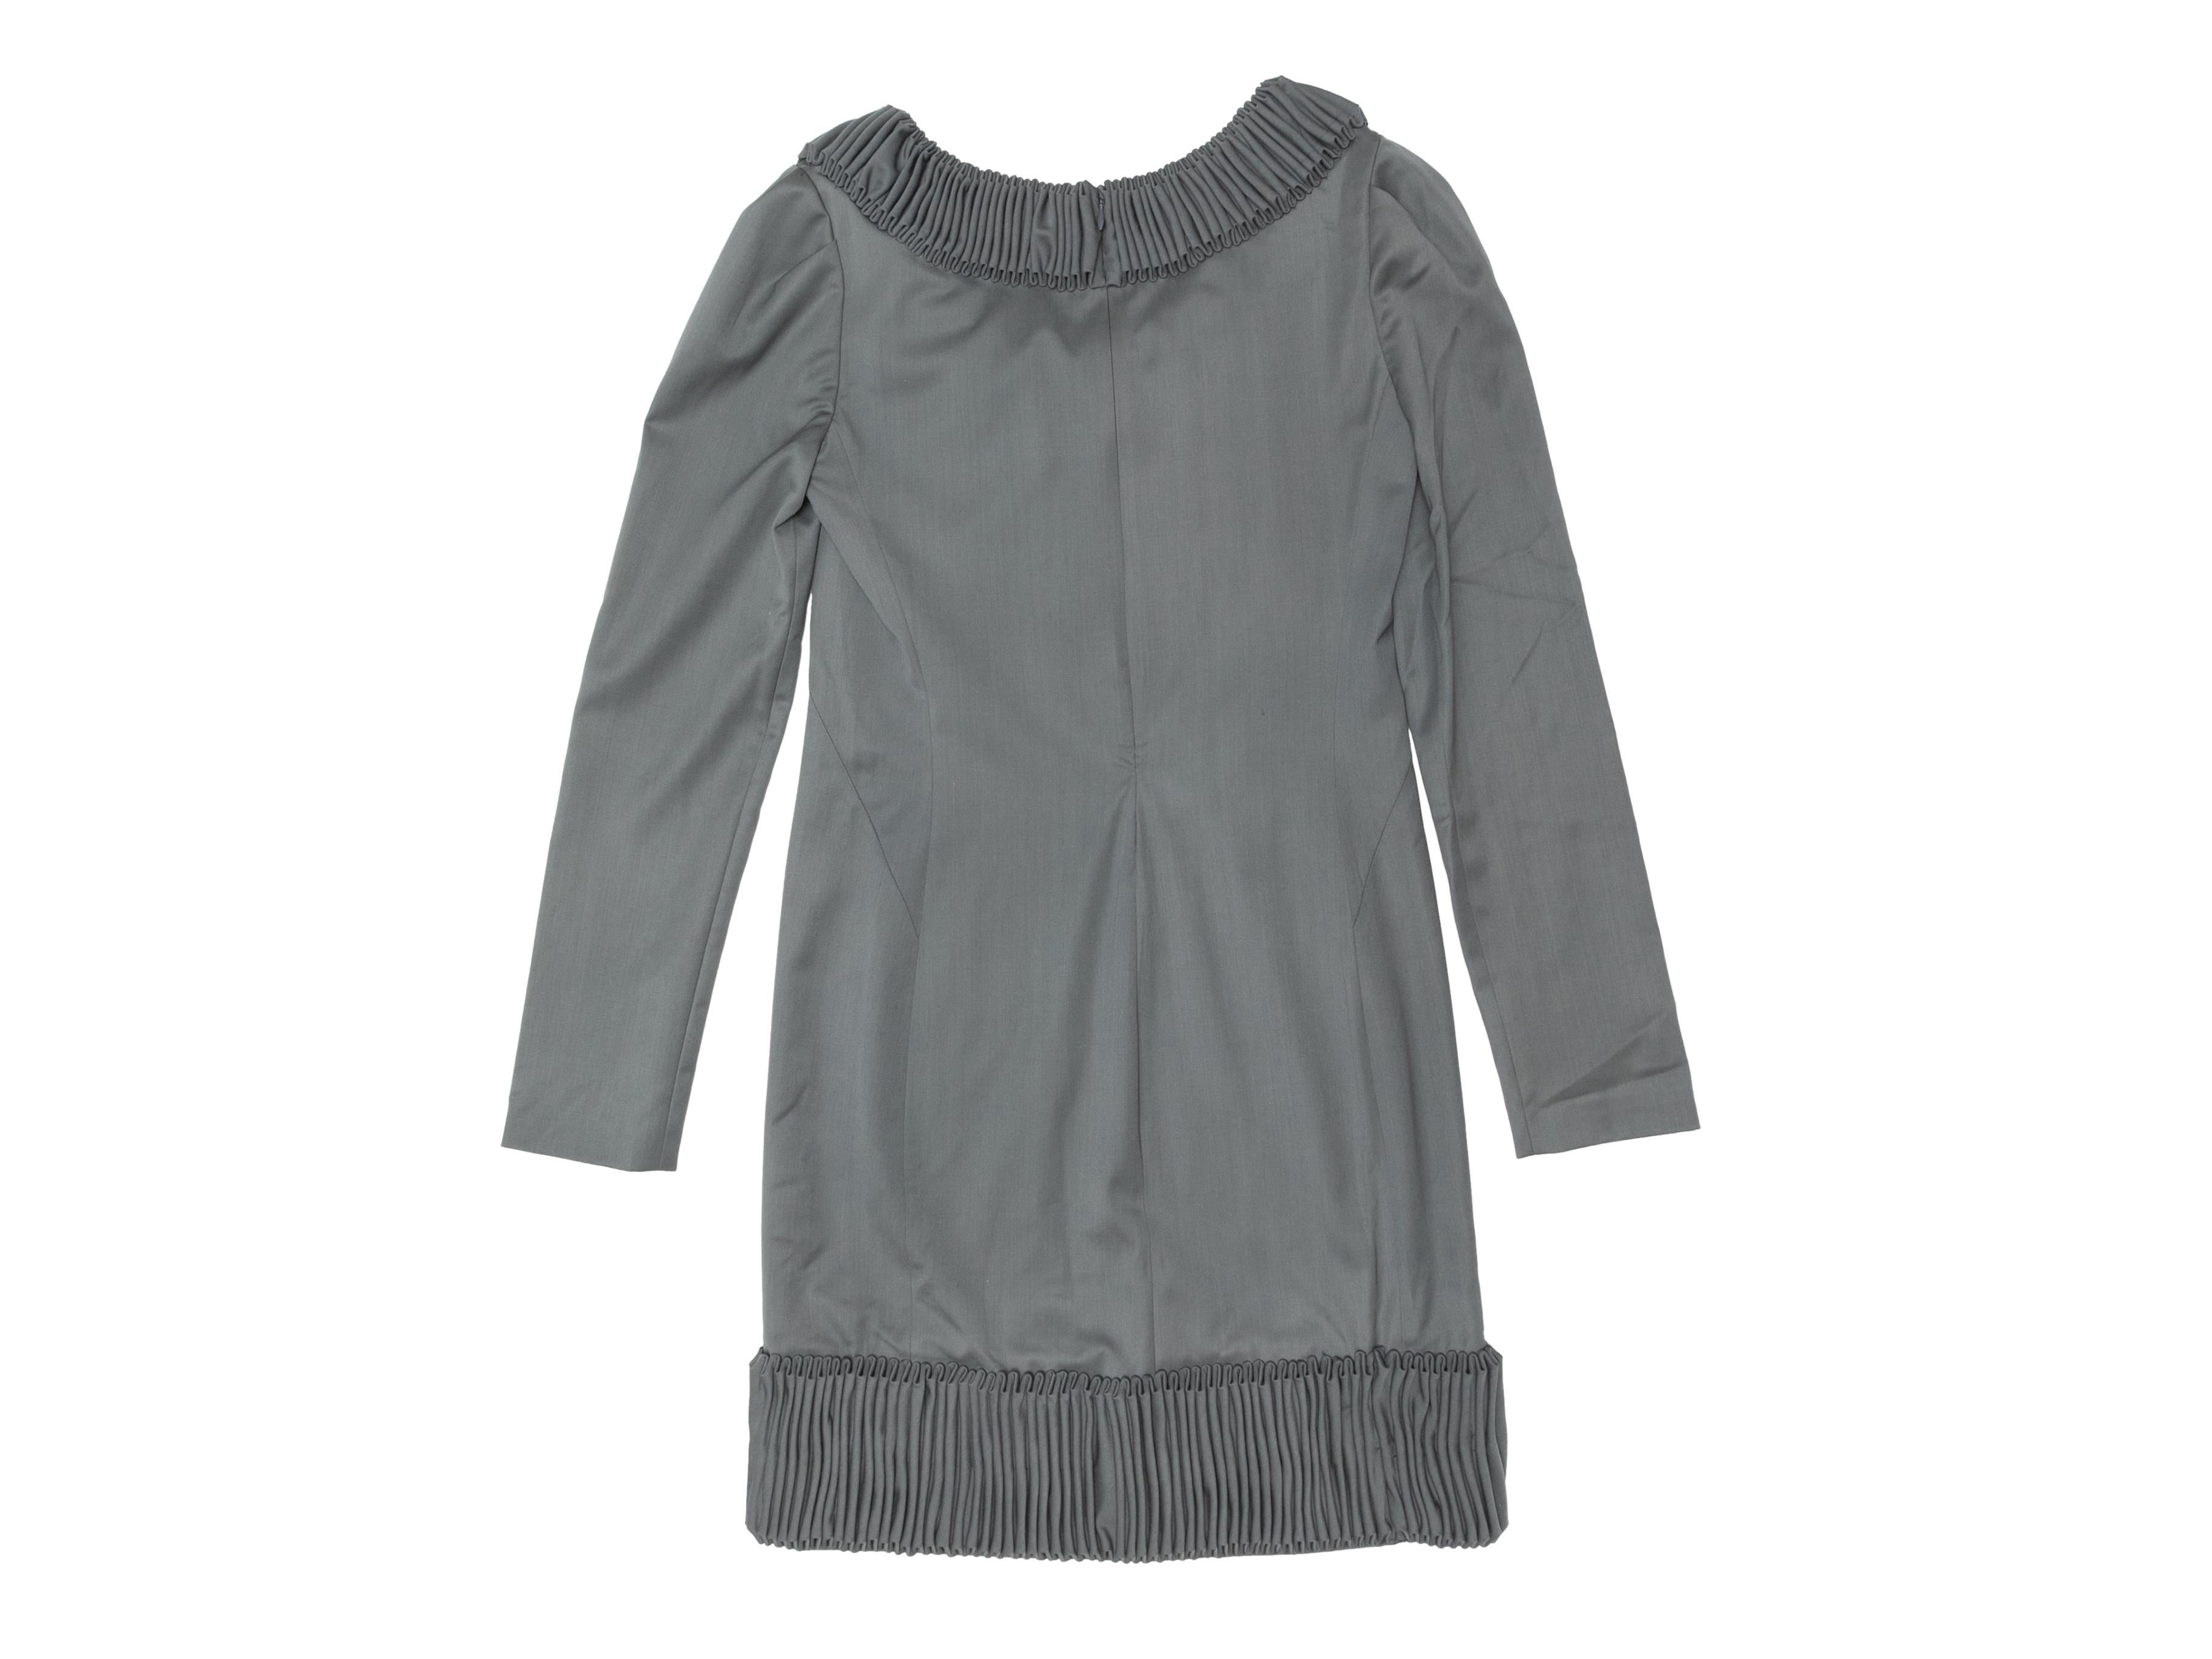 Grey long sleeve mini dress by Devi Kroell. Crew neck. Pleated trim throughout. Zip closure at center back. 28